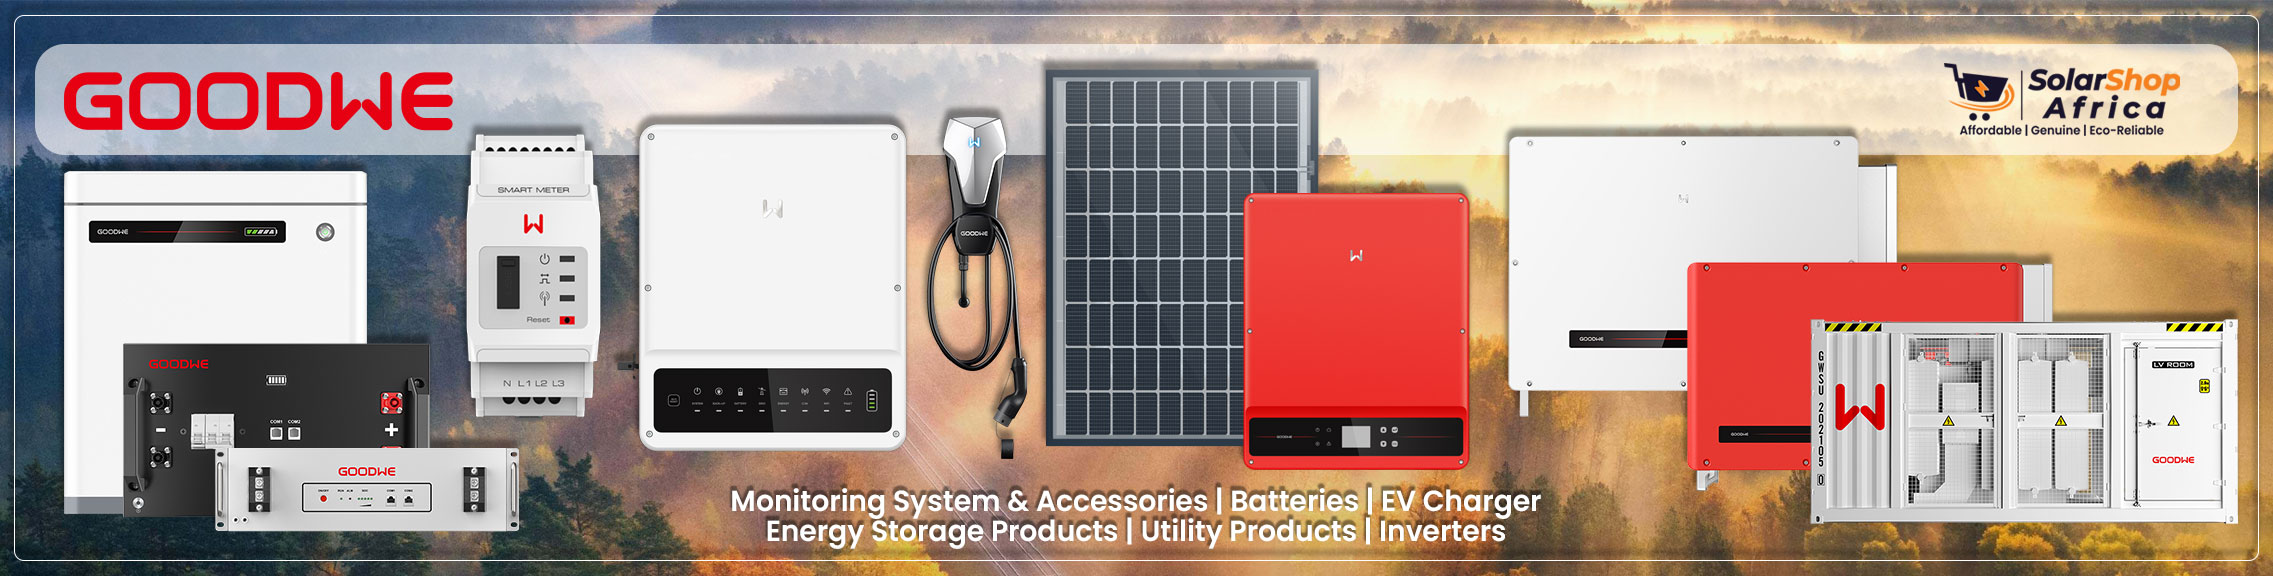 Goodwe Solar products best prices in Kenya SolarShop Africa